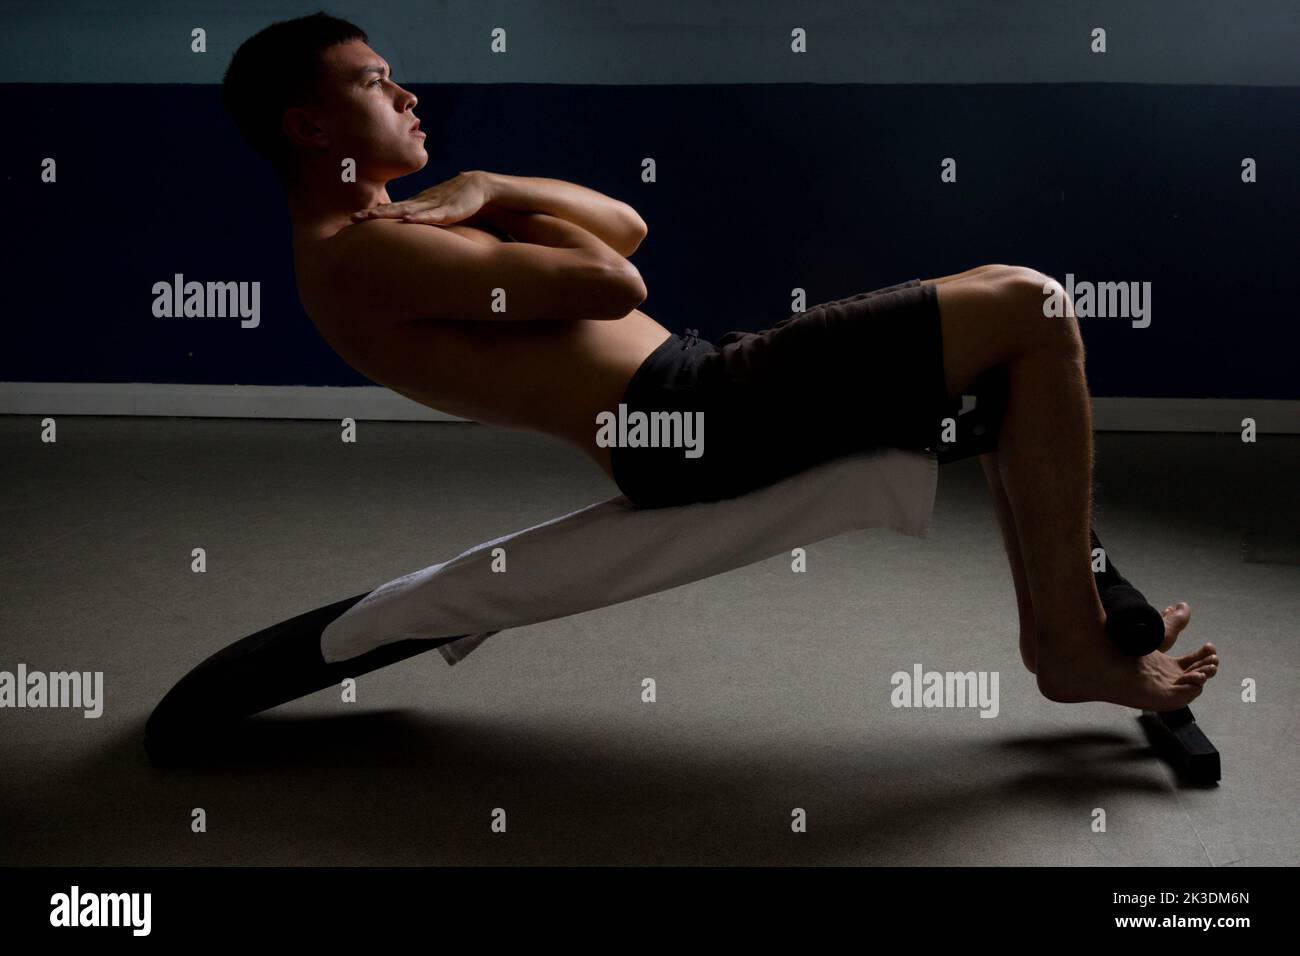 Shirtless 19 year old teenage boy soing situps on an exercise bench Stock Photo